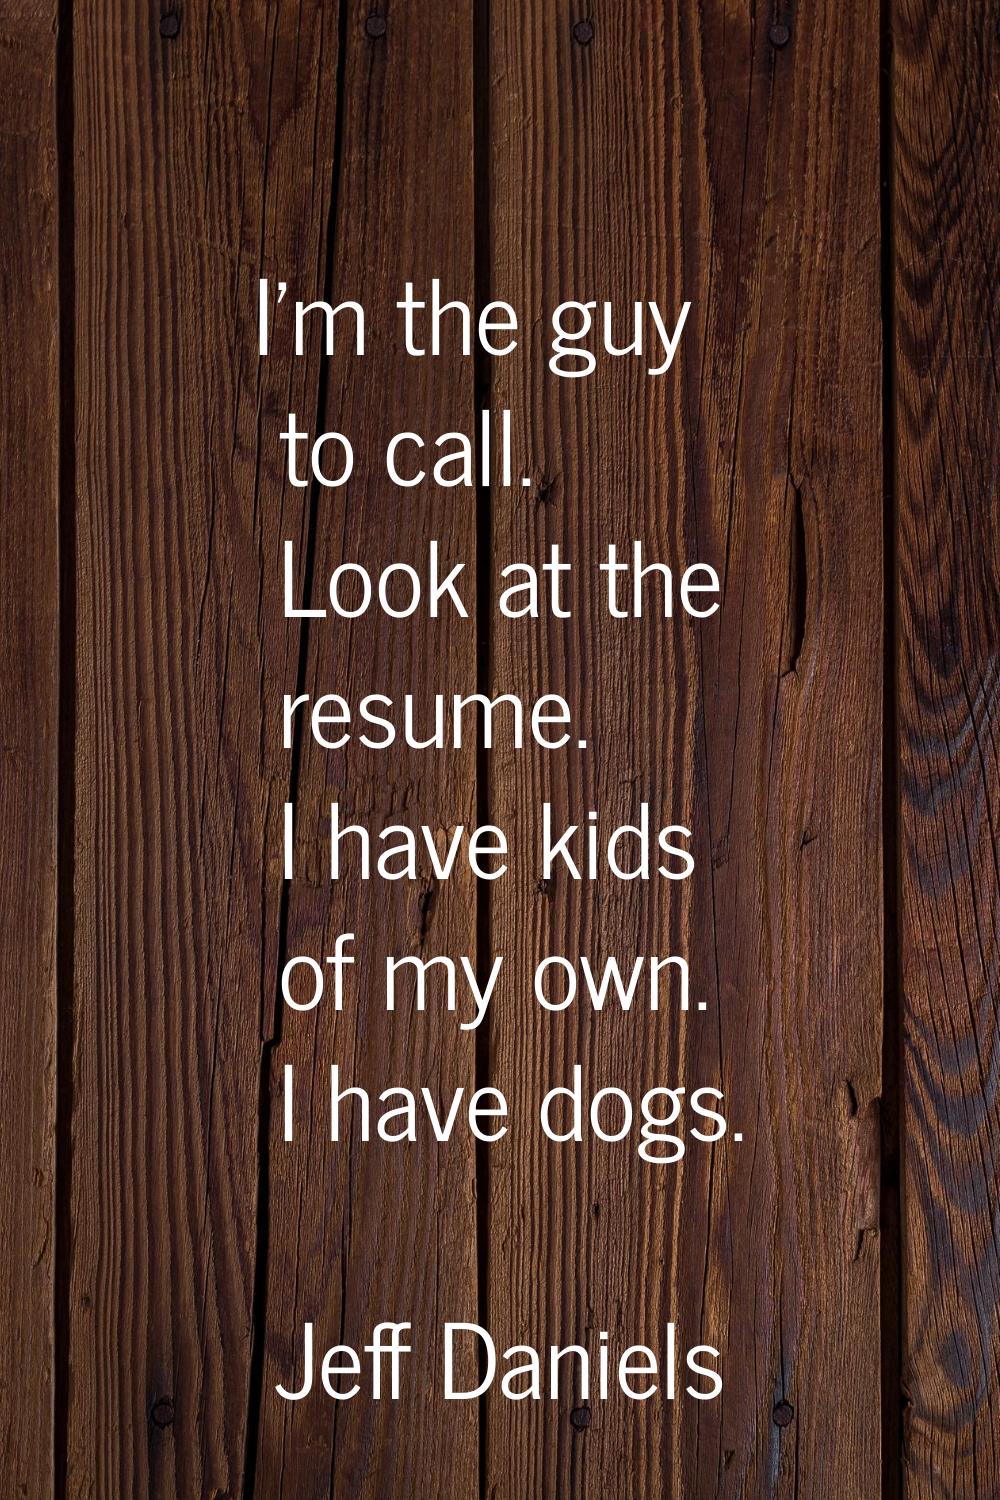 I'm the guy to call. Look at the resume. I have kids of my own. I have dogs.